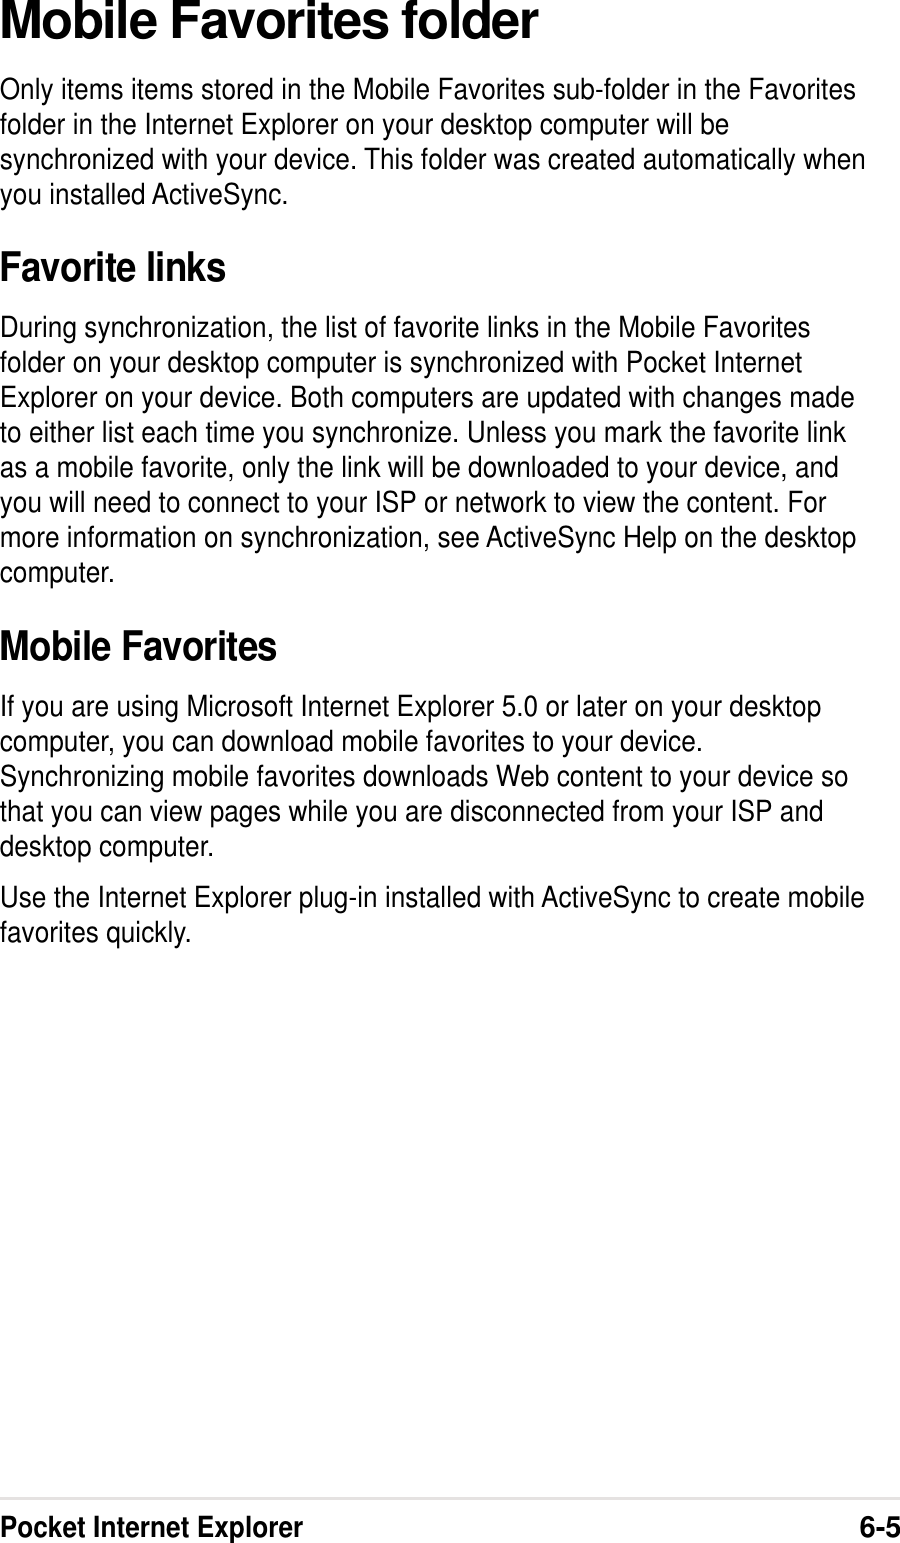 Pocket Internet Explorer6-5Mobile Favorites folderOnly items items stored in the Mobile Favorites sub-folder in the Favoritesfolder in the Internet Explorer on your desktop computer will besynchronized with your device. This folder was created automatically whenyou installed ActiveSync.Favorite linksDuring synchronization, the list of favorite links in the Mobile Favoritesfolder on your desktop computer is synchronized with Pocket InternetExplorer on your device. Both computers are updated with changes madeto either list each time you synchronize. Unless you mark the favorite linkas a mobile favorite, only the link will be downloaded to your device, andyou will need to connect to your ISP or network to view the content. Formore information on synchronization, see ActiveSync Help on the desktopcomputer.Mobile FavoritesIf you are using Microsoft Internet Explorer 5.0 or later on your desktopcomputer, you can download mobile favorites to your device.Synchronizing mobile favorites downloads Web content to your device sothat you can view pages while you are disconnected from your ISP anddesktop computer.Use the Internet Explorer plug-in installed with ActiveSync to create mobilefavorites quickly.